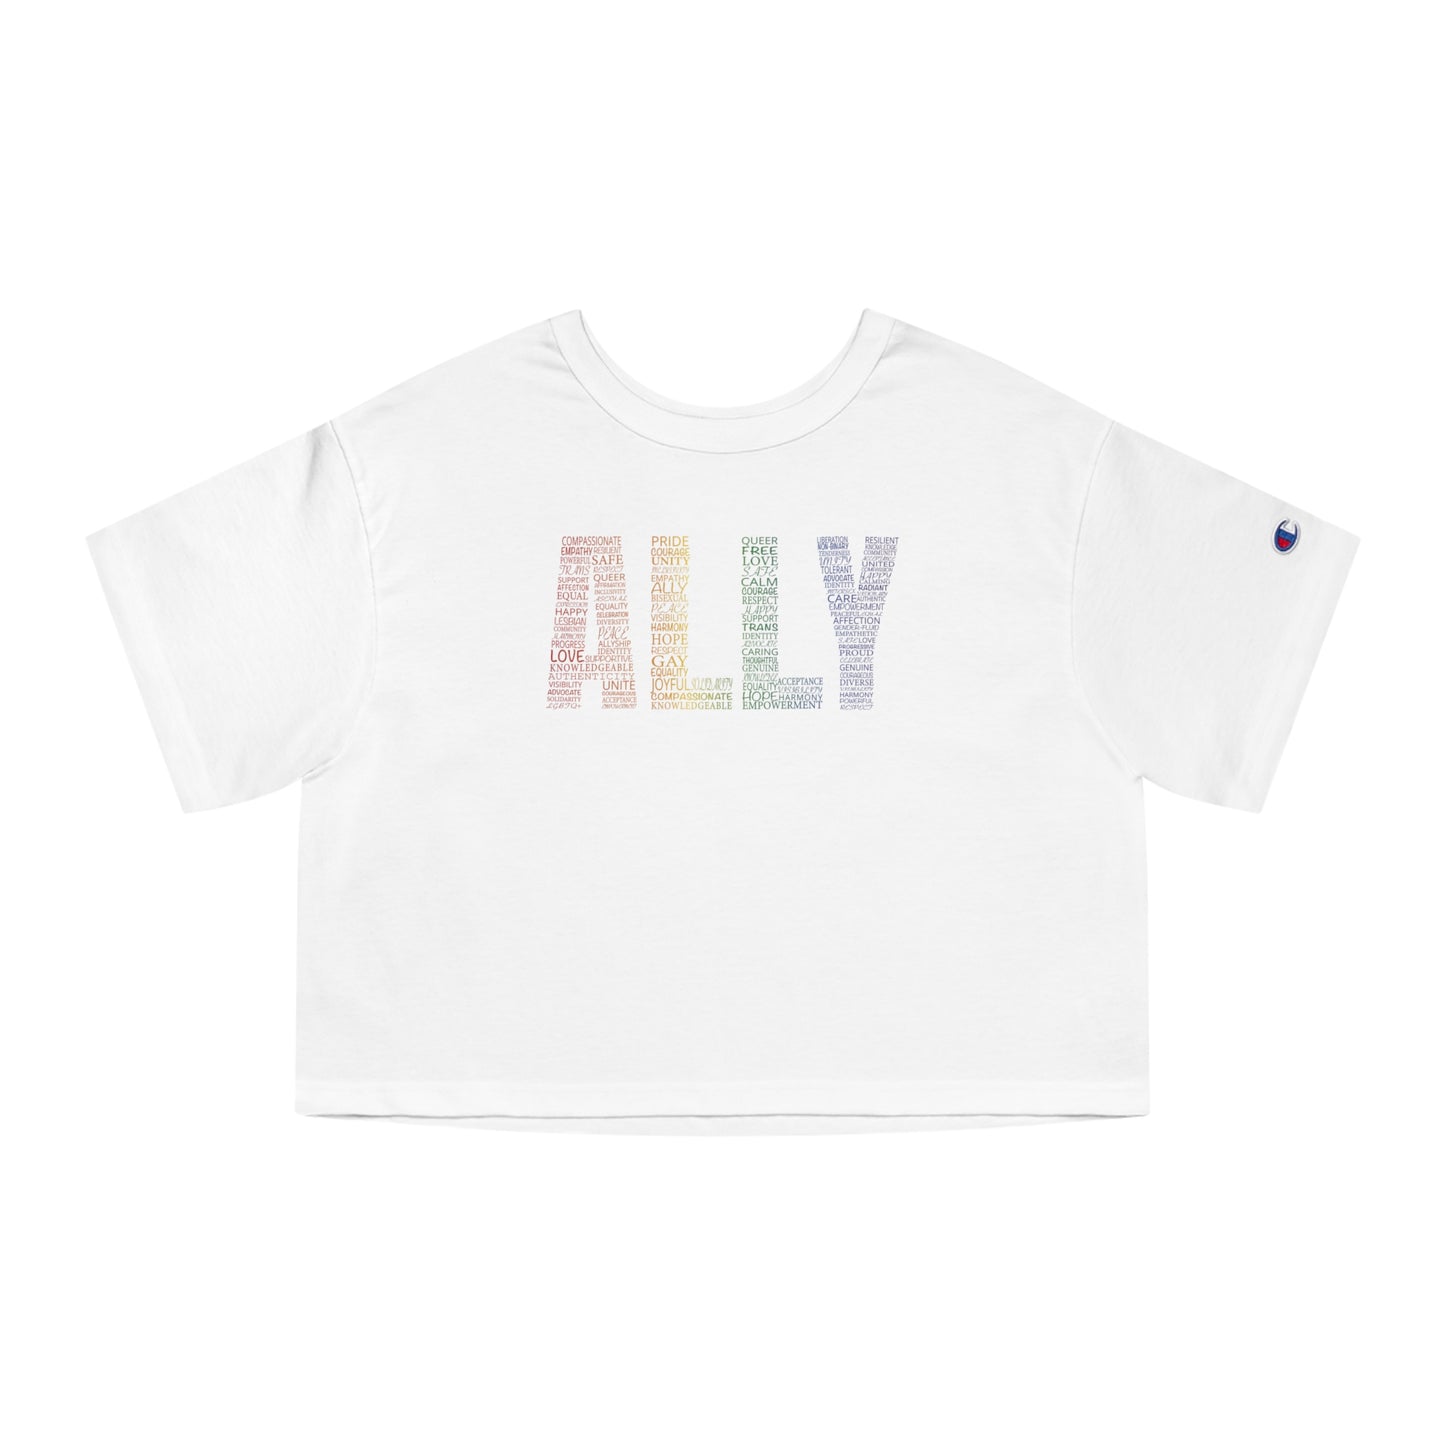 Ally Calligram Cropped T-Shirt